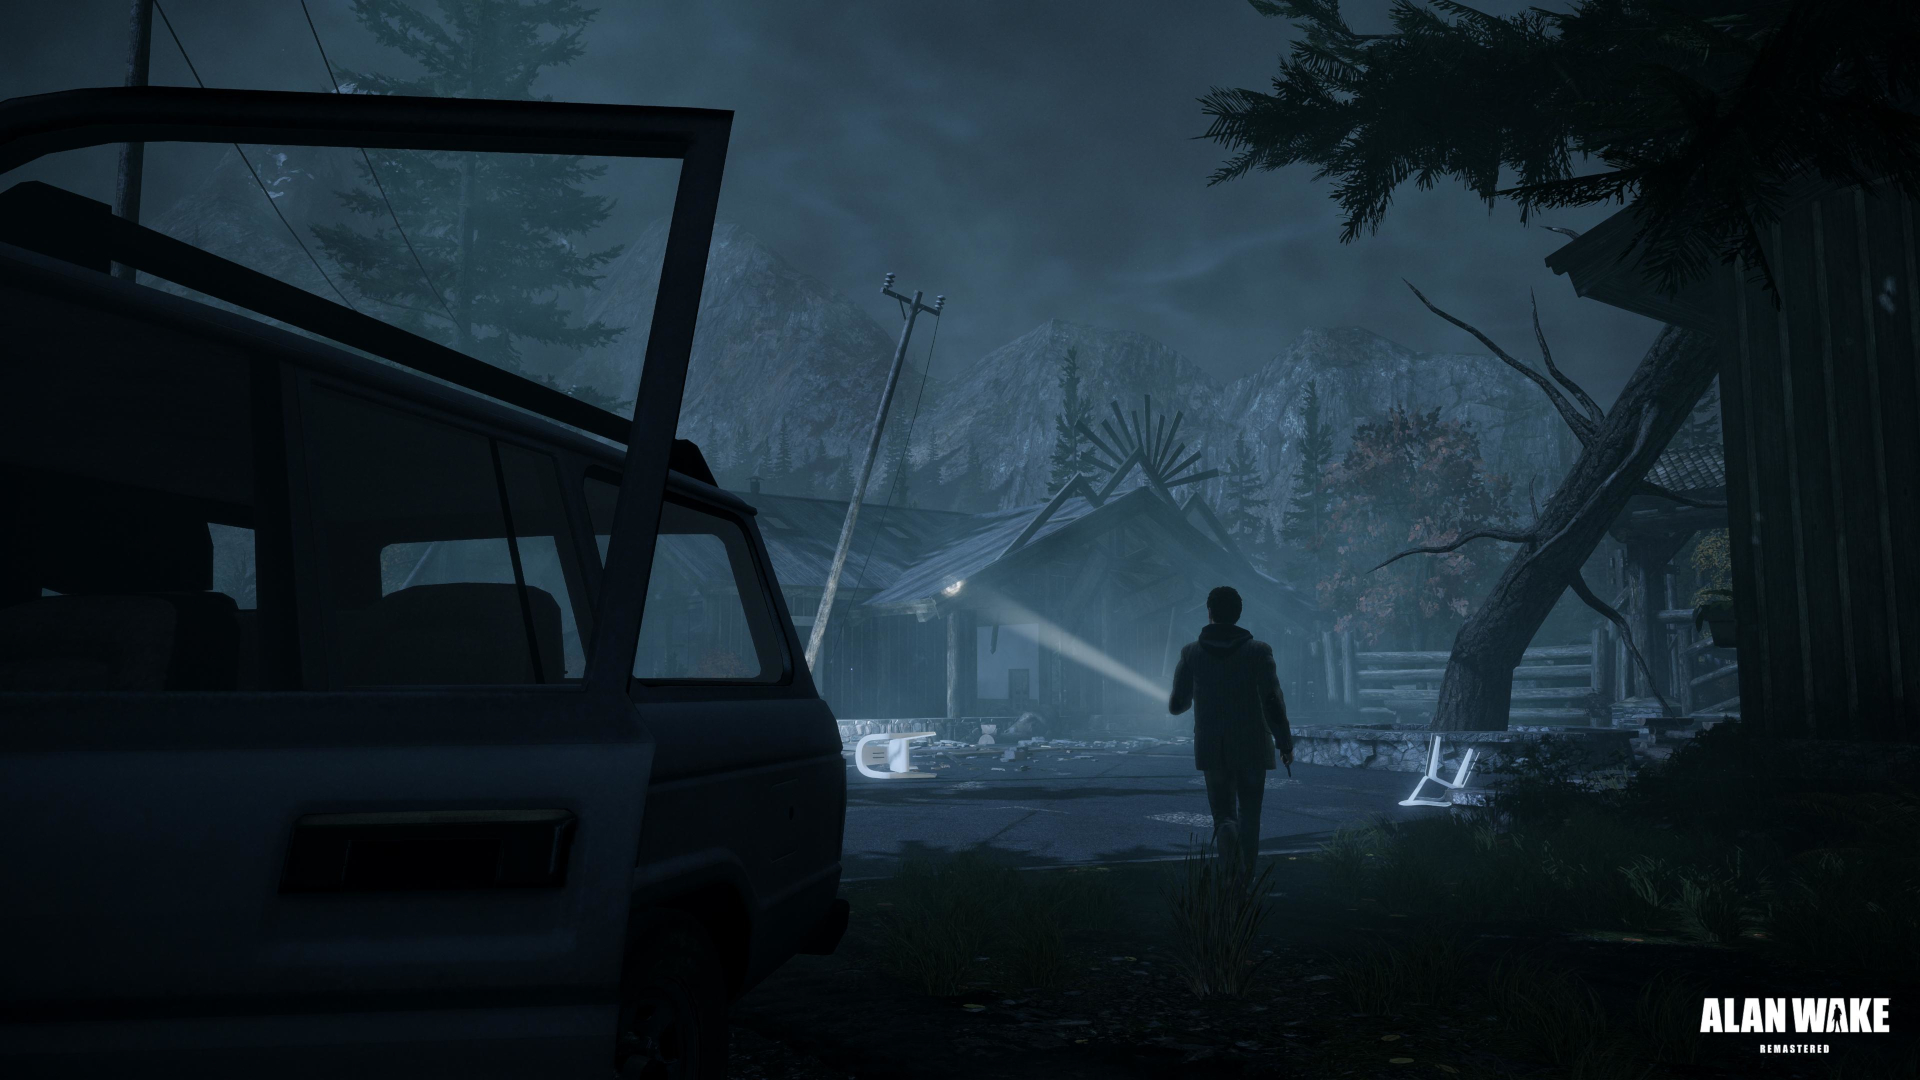 Alan Wake 2 Reportedly Now In Active Development Got This Covered